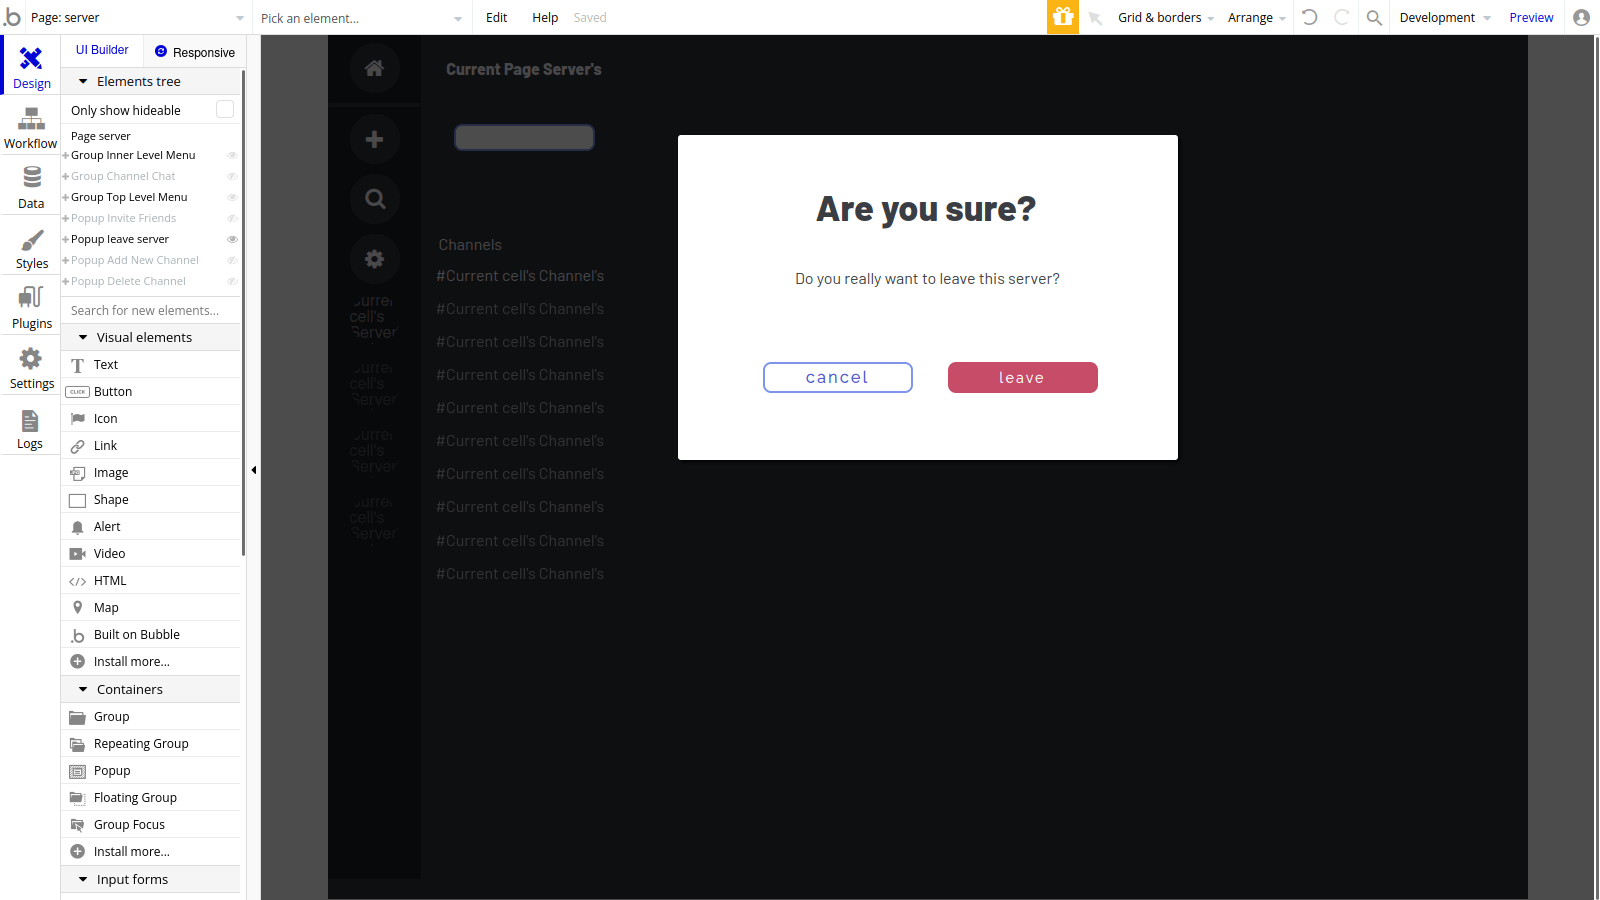 Confirmation popup when requesting to leave server.